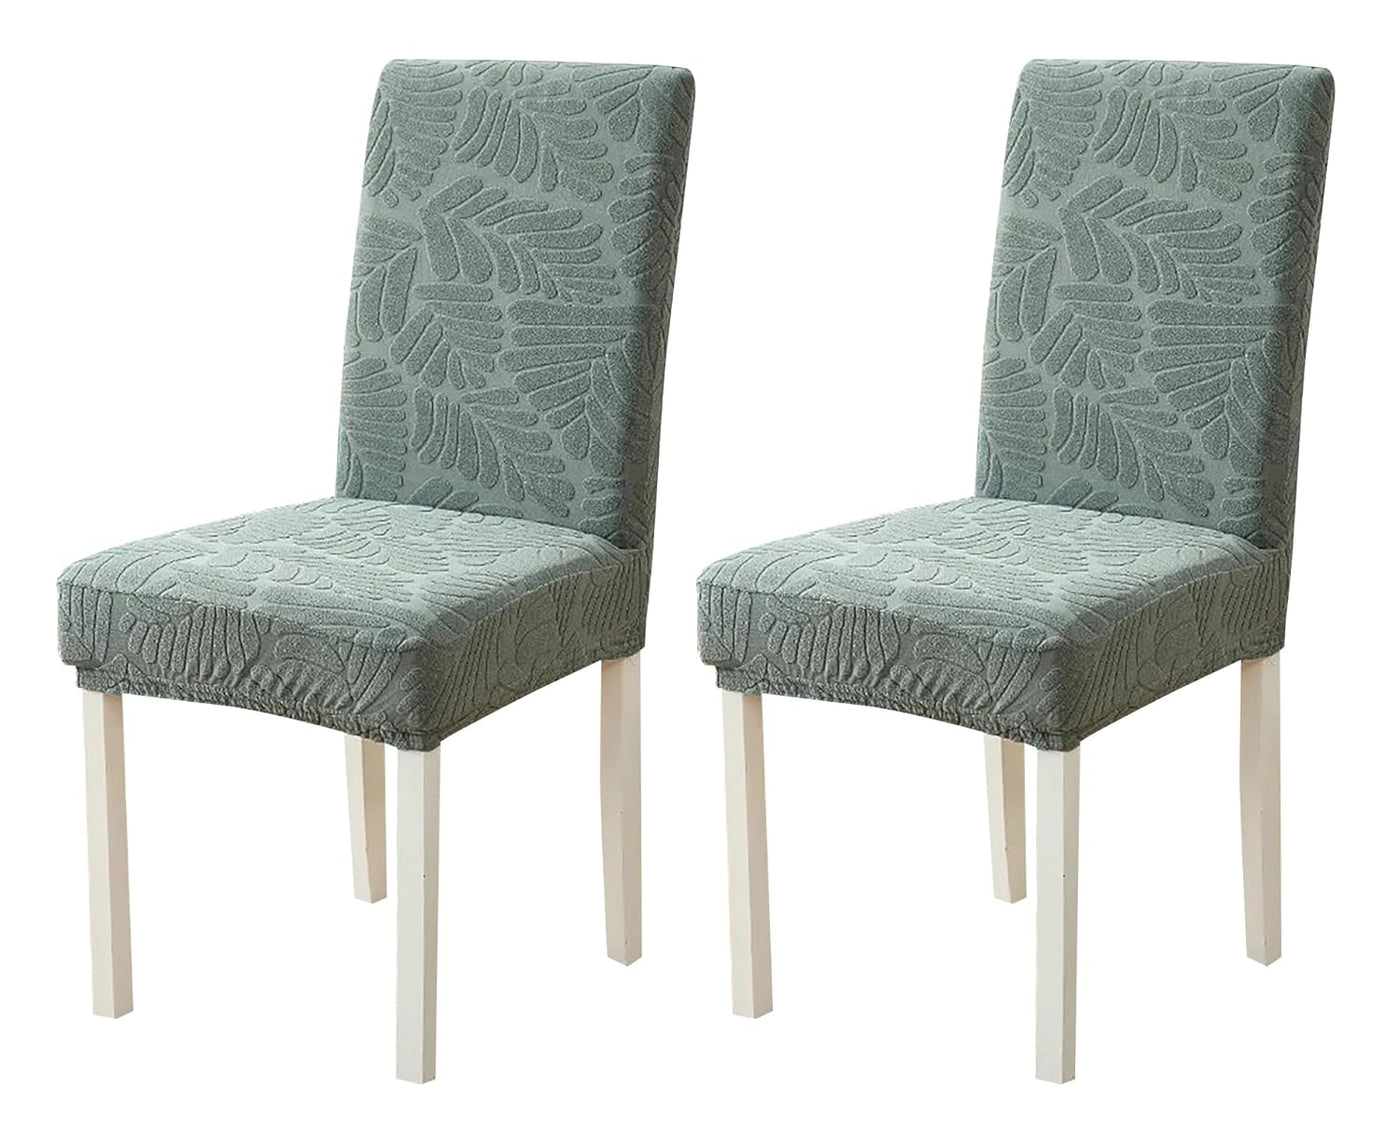 Jacquard Leaf Chair Cover-Pastel Green